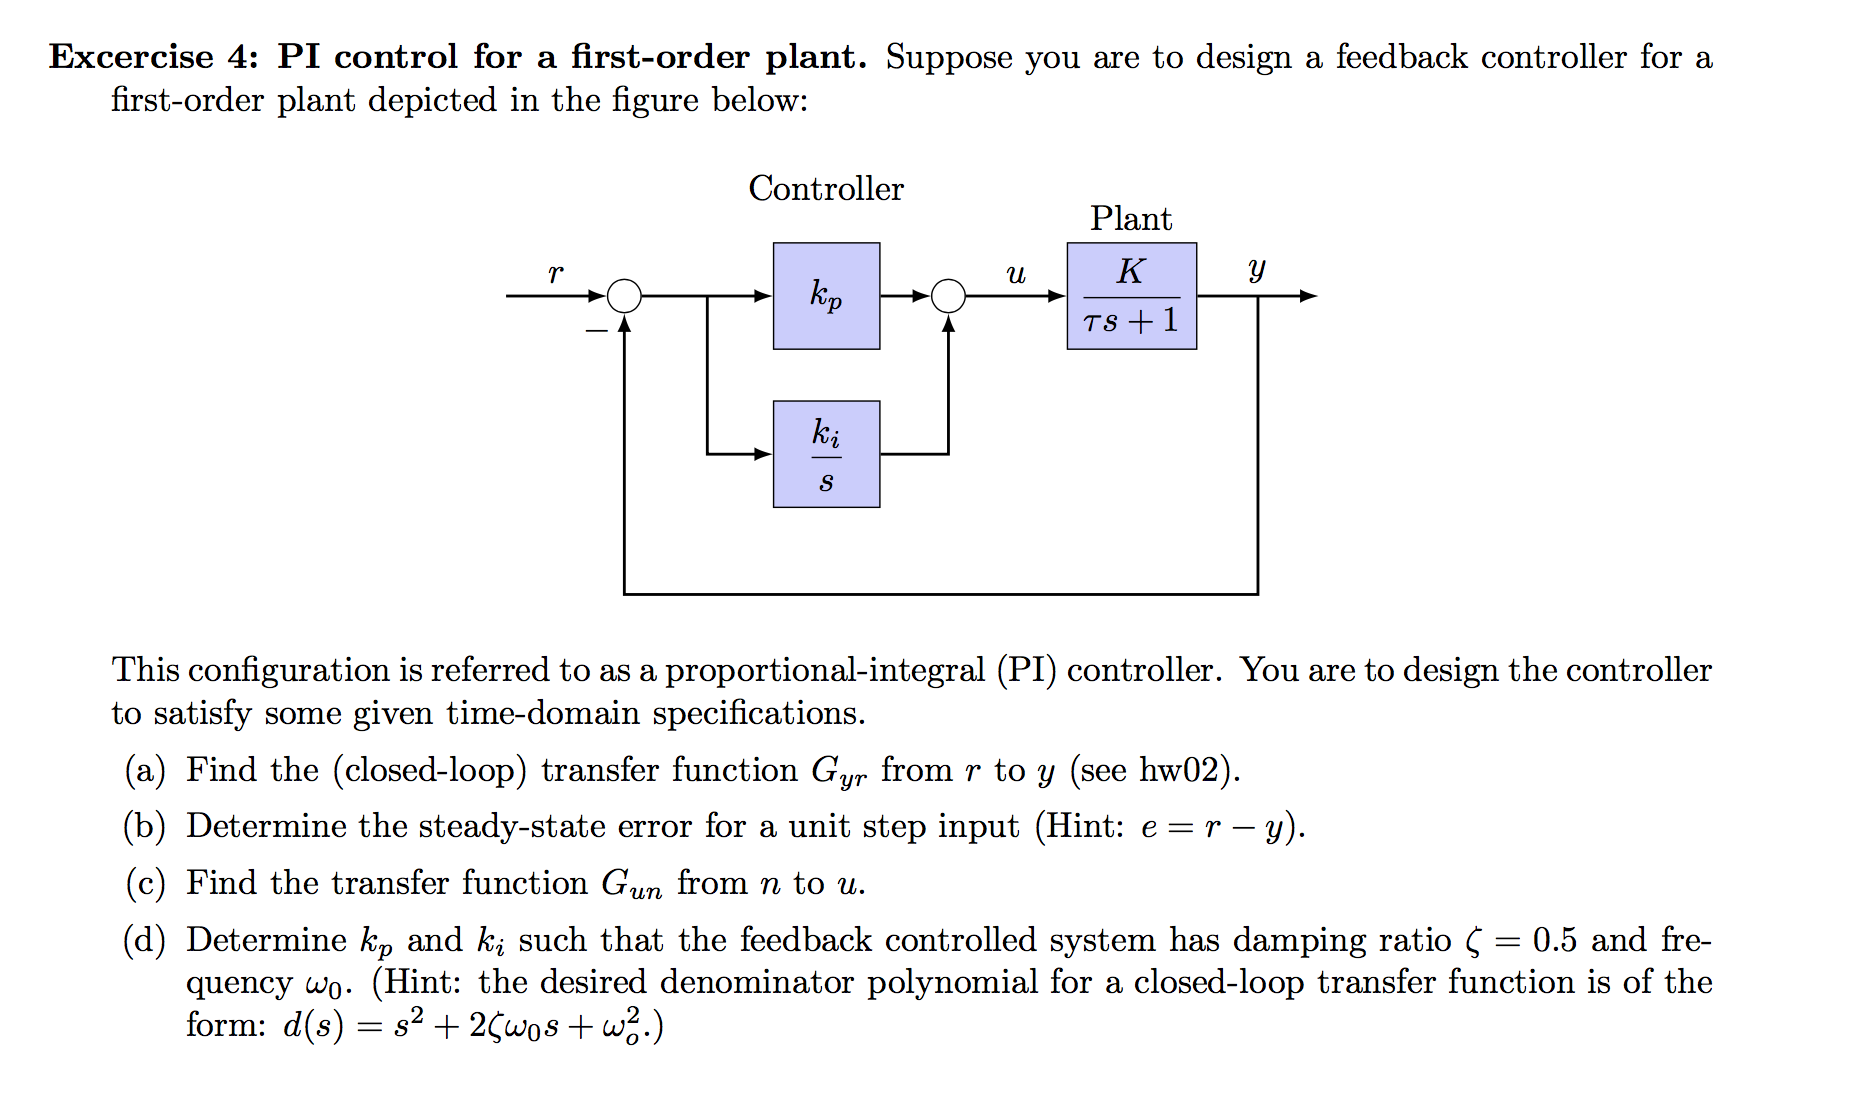 Excercise 4: PI control for a first-order plant. Suppose you are to design a feedback controller for a
first-order plant depicted in the figure below:
Controller
Plant
К
y
и
Кр
TS1
ki
This configuration is referred to as a proportional-integral (PI) controller. You are to design the controller
to satisfy some given time-domain specifications.
(a) Find the (closed-loop) transfer function Gyr from r to y (see hw02)
(b) Determine the steady-state error for a unit step input (Hint: e r - y).
(c) Find the transfer function Gum from n to u
(d) Determine kp and ki such that the feedback controlled system has damping ratio Ç = 0.5 and fre-
quency wo. (Hint: the desired denominator polynomial for a closed-loop transfer function is of the
form: d(s) s22wos +w2.)
